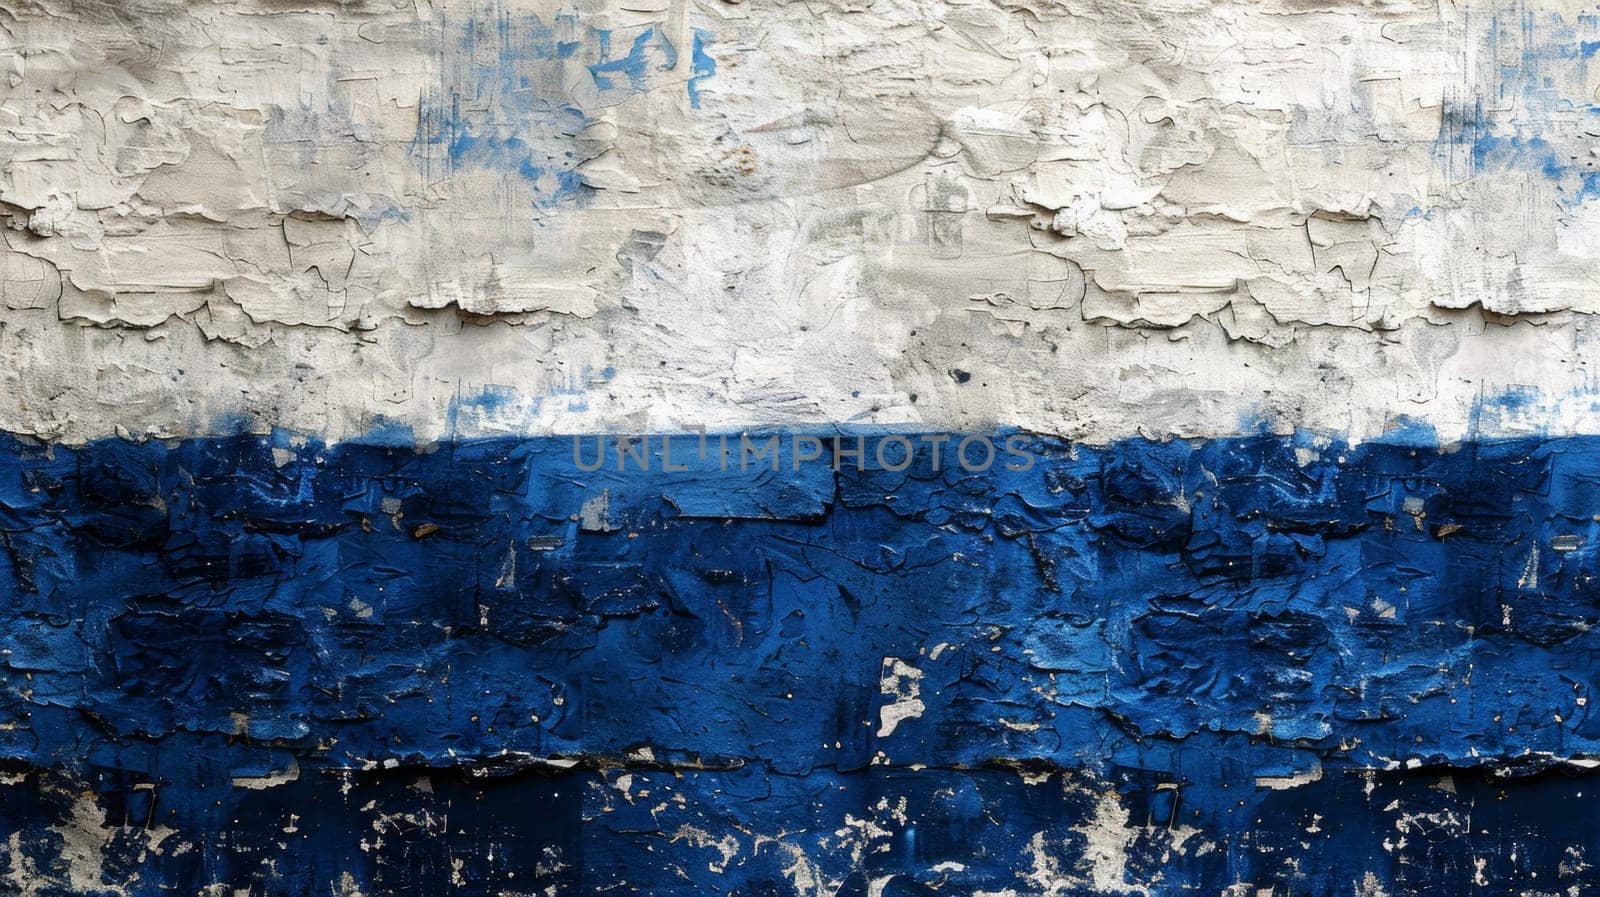 A blue and white paint on a wall with an old clock